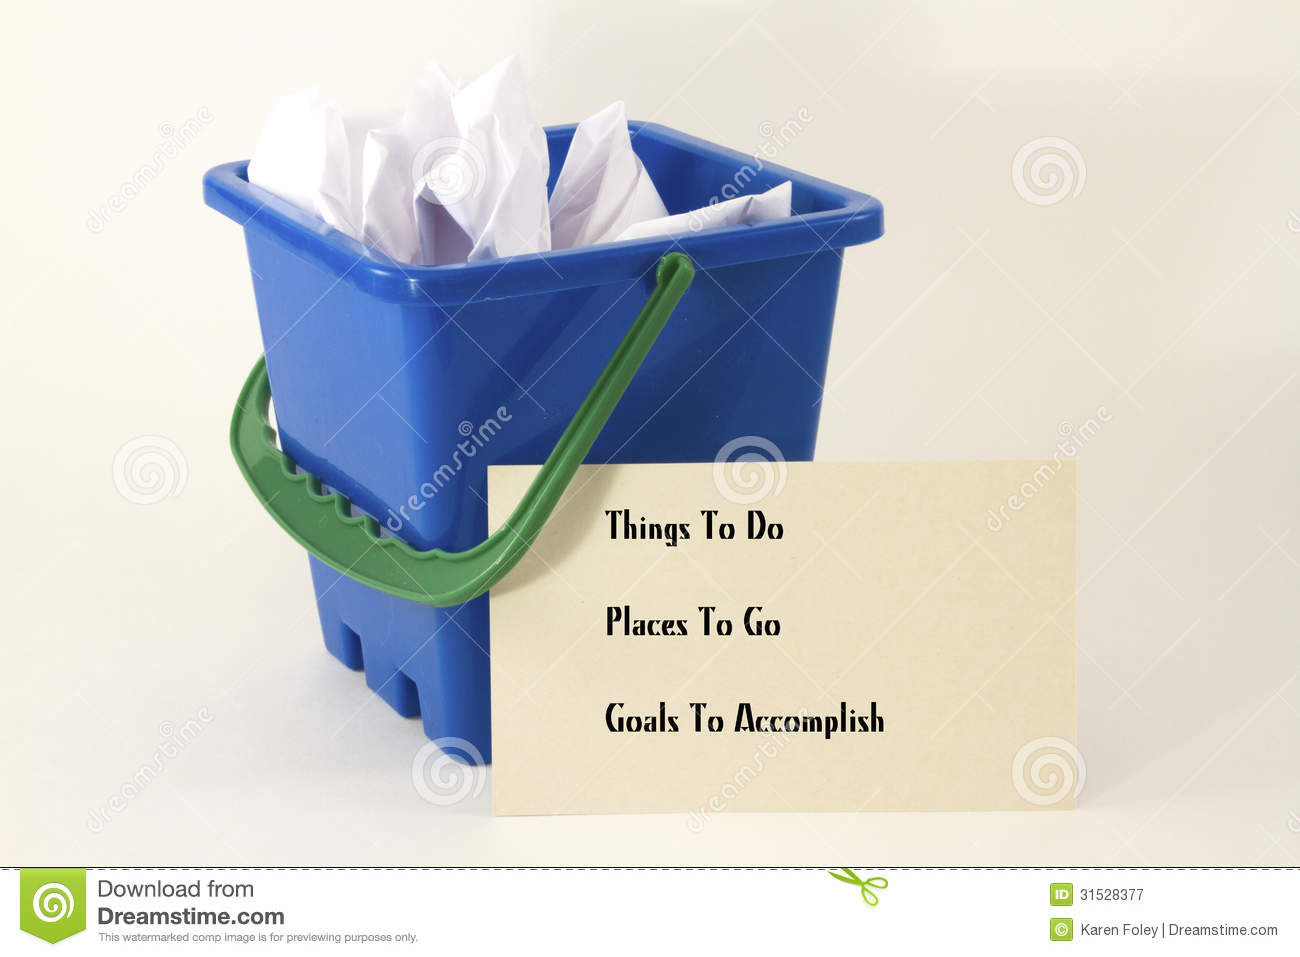 Bucket Filled With Wadded Up Paper With One Sheet Listing Things To Do    